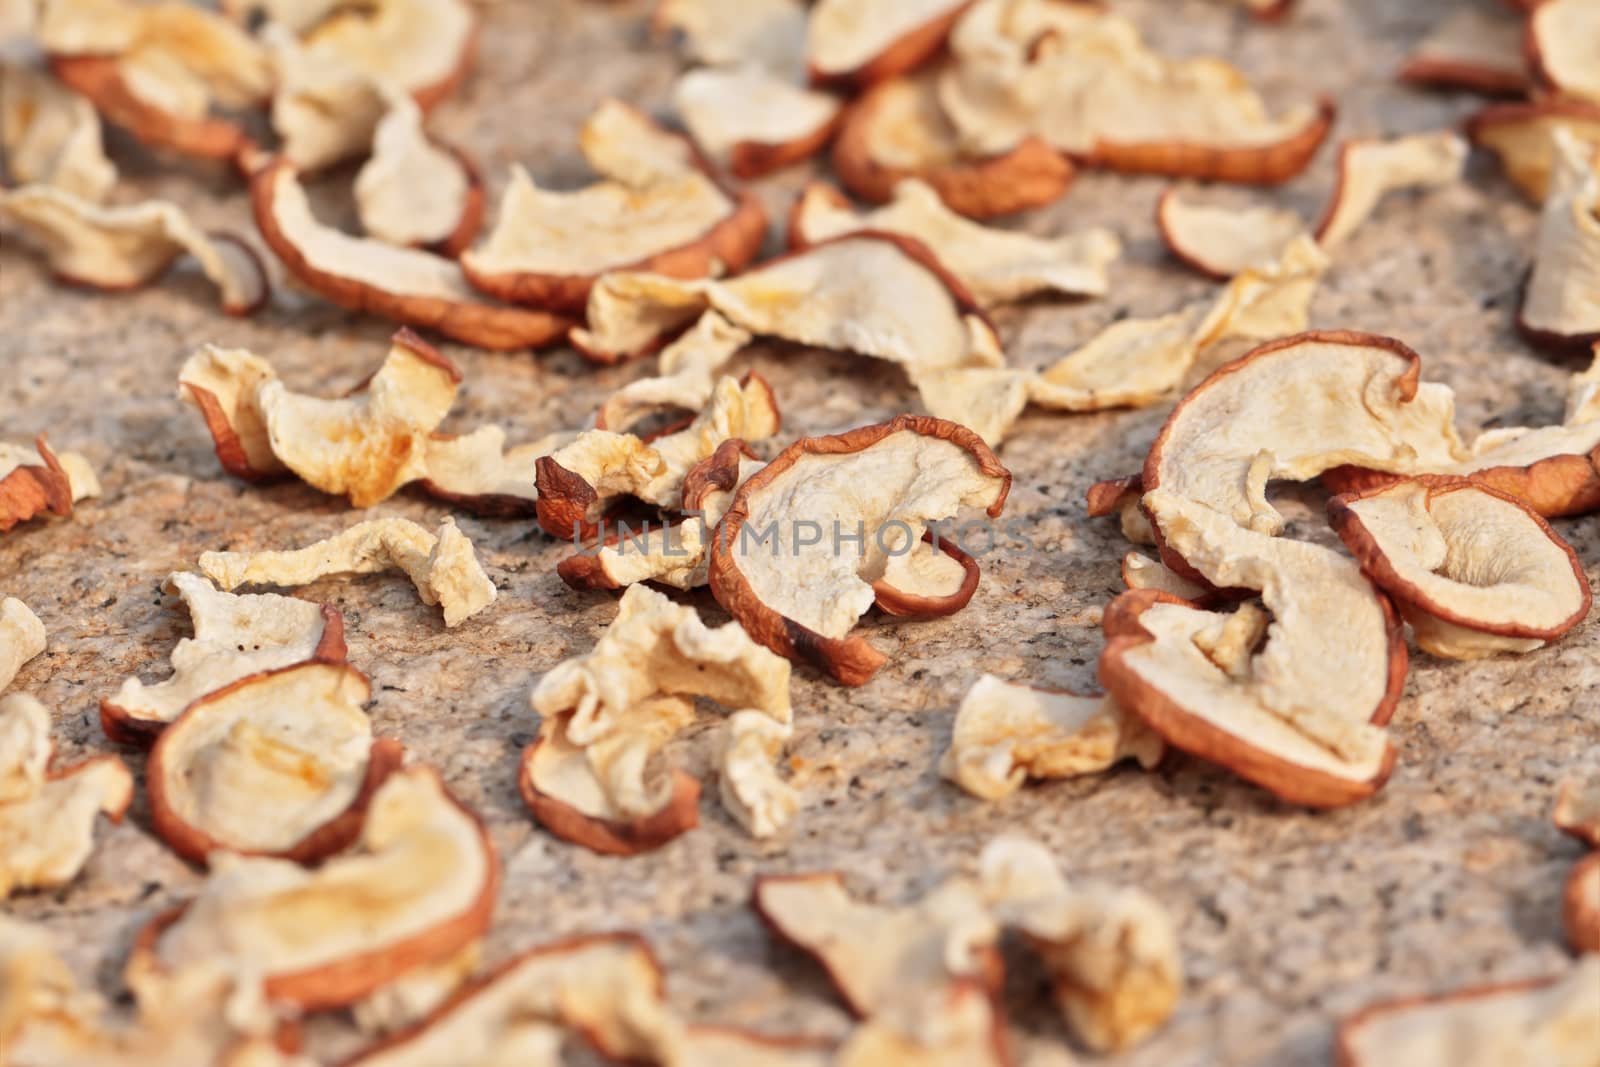 Sun drying sliced apples with selected focus